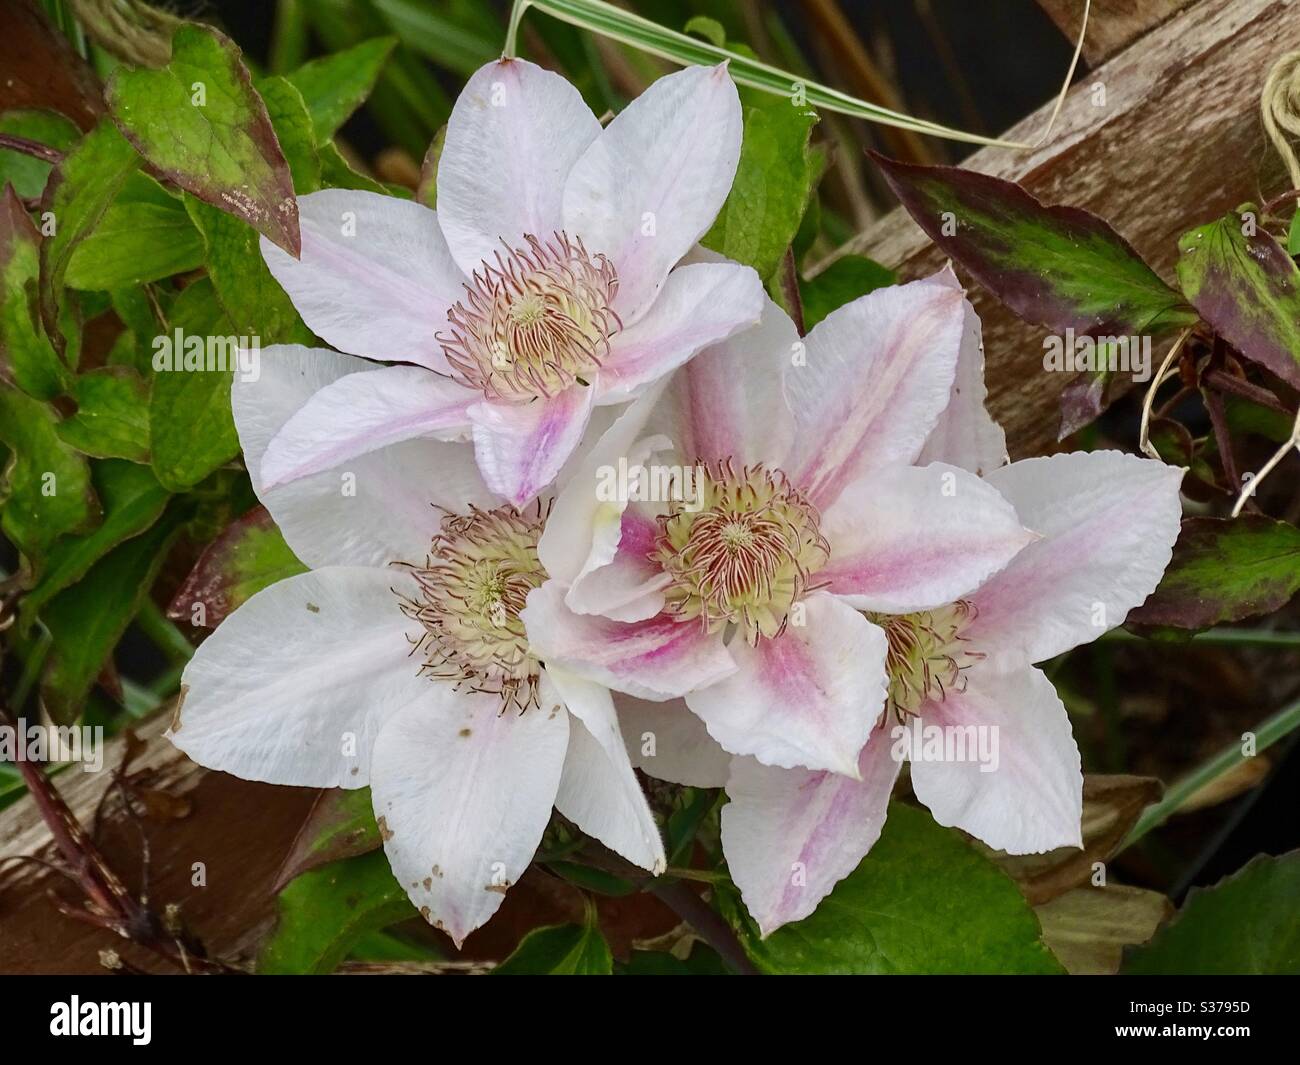 Cluster of delicate clematis flowers in early summer Stock Photo